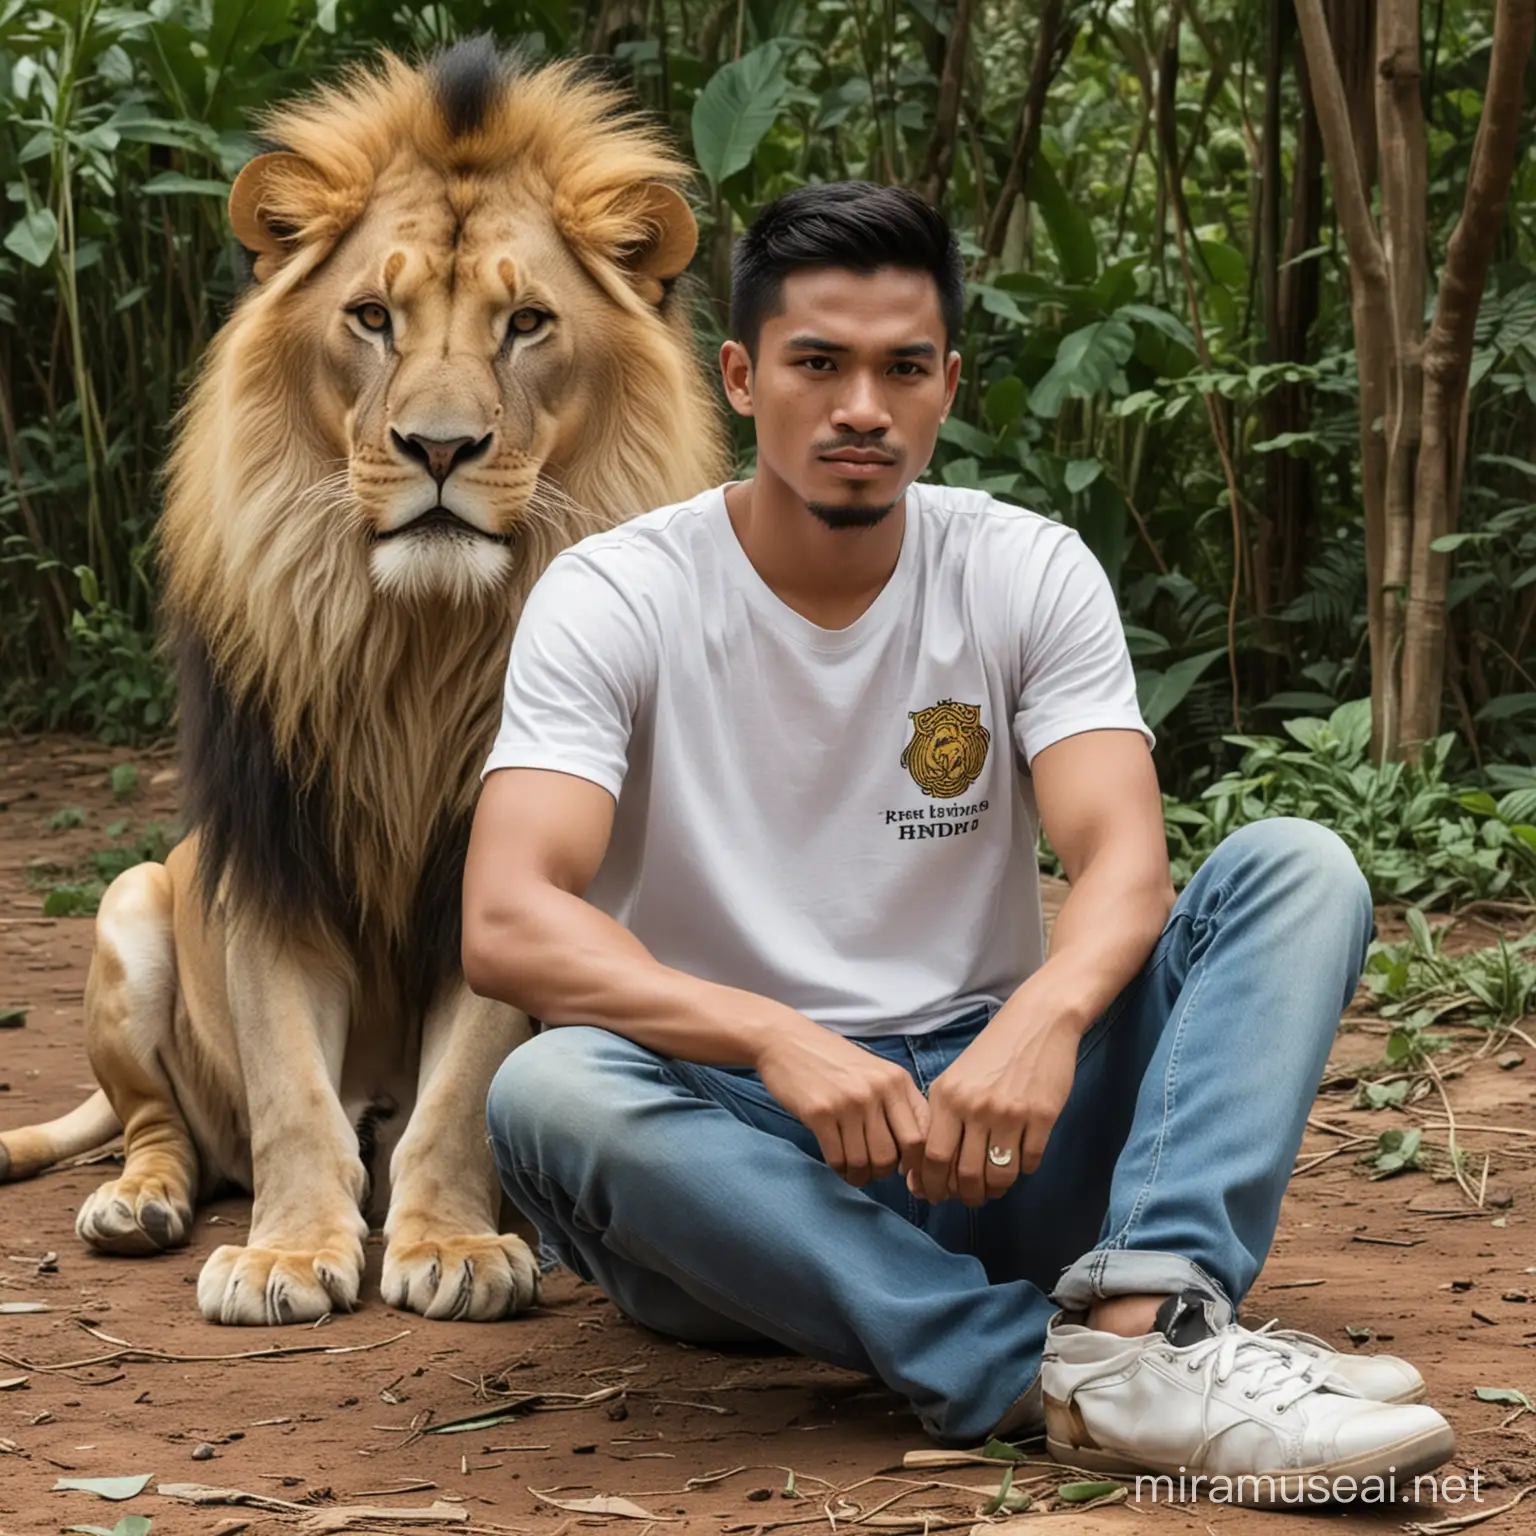 Indonesian Man Bonding with Lion in Jungle Setting